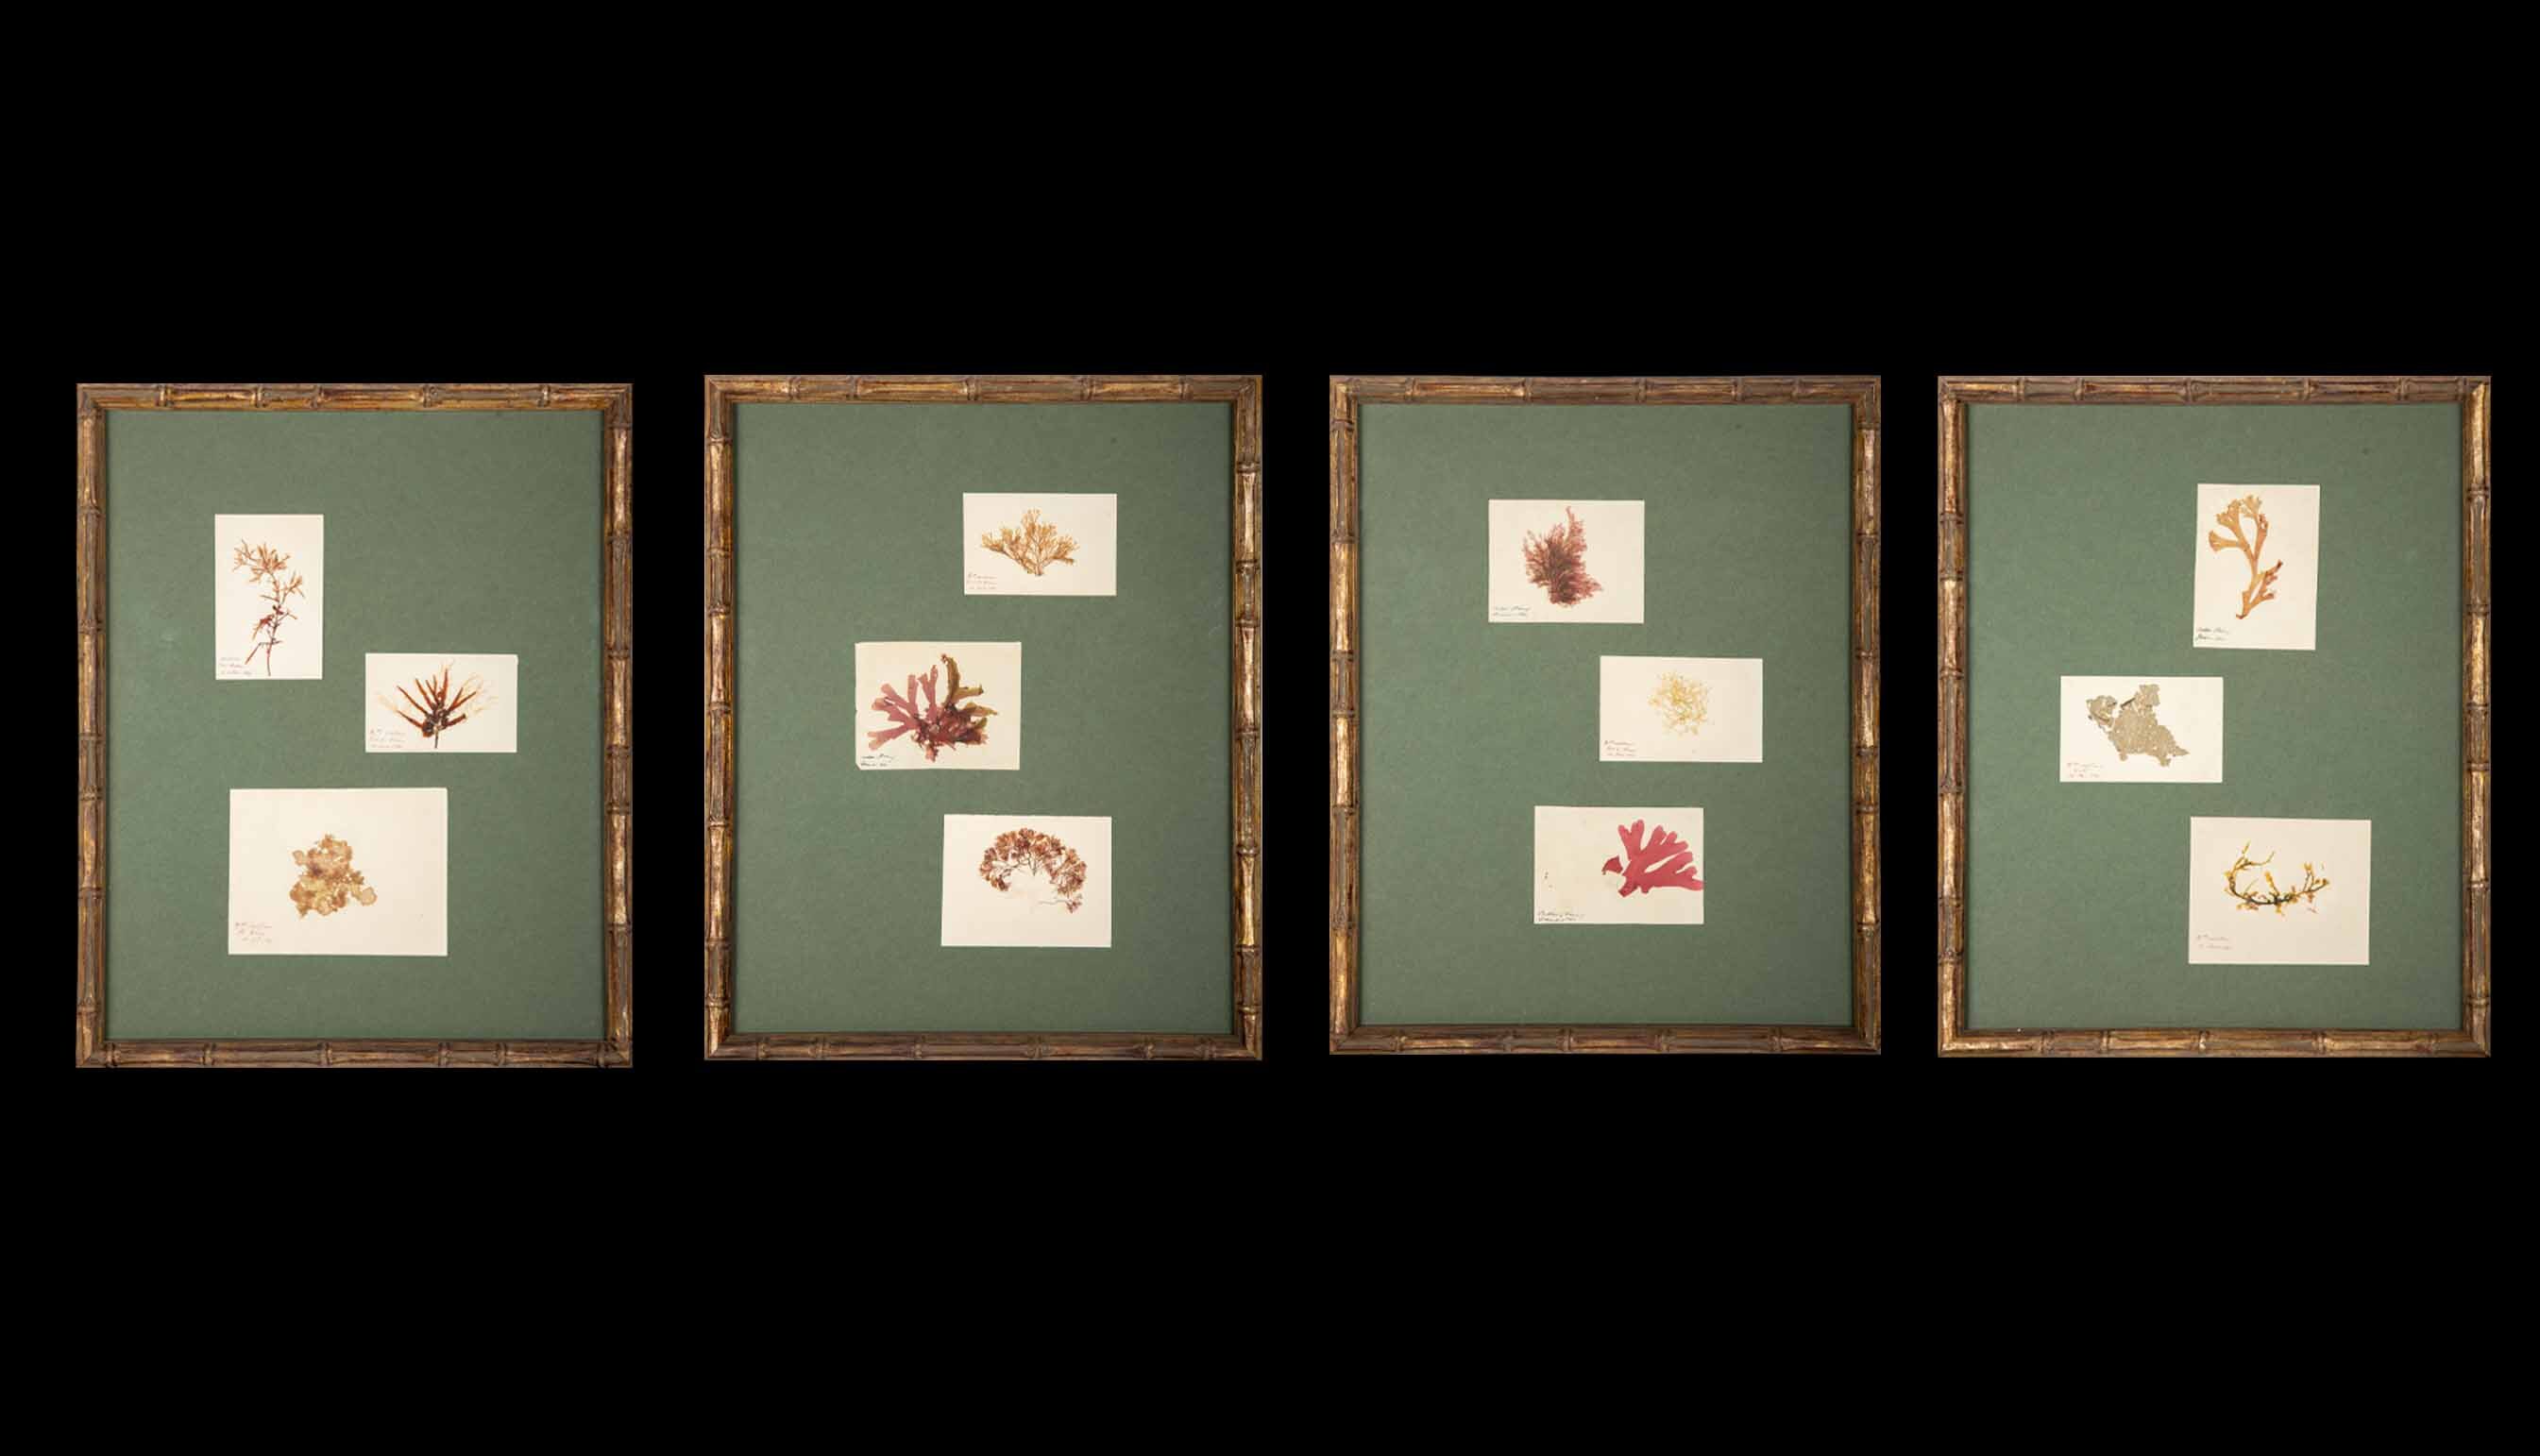 Framed and Pressed French Alguier Specimens from the 19th Century